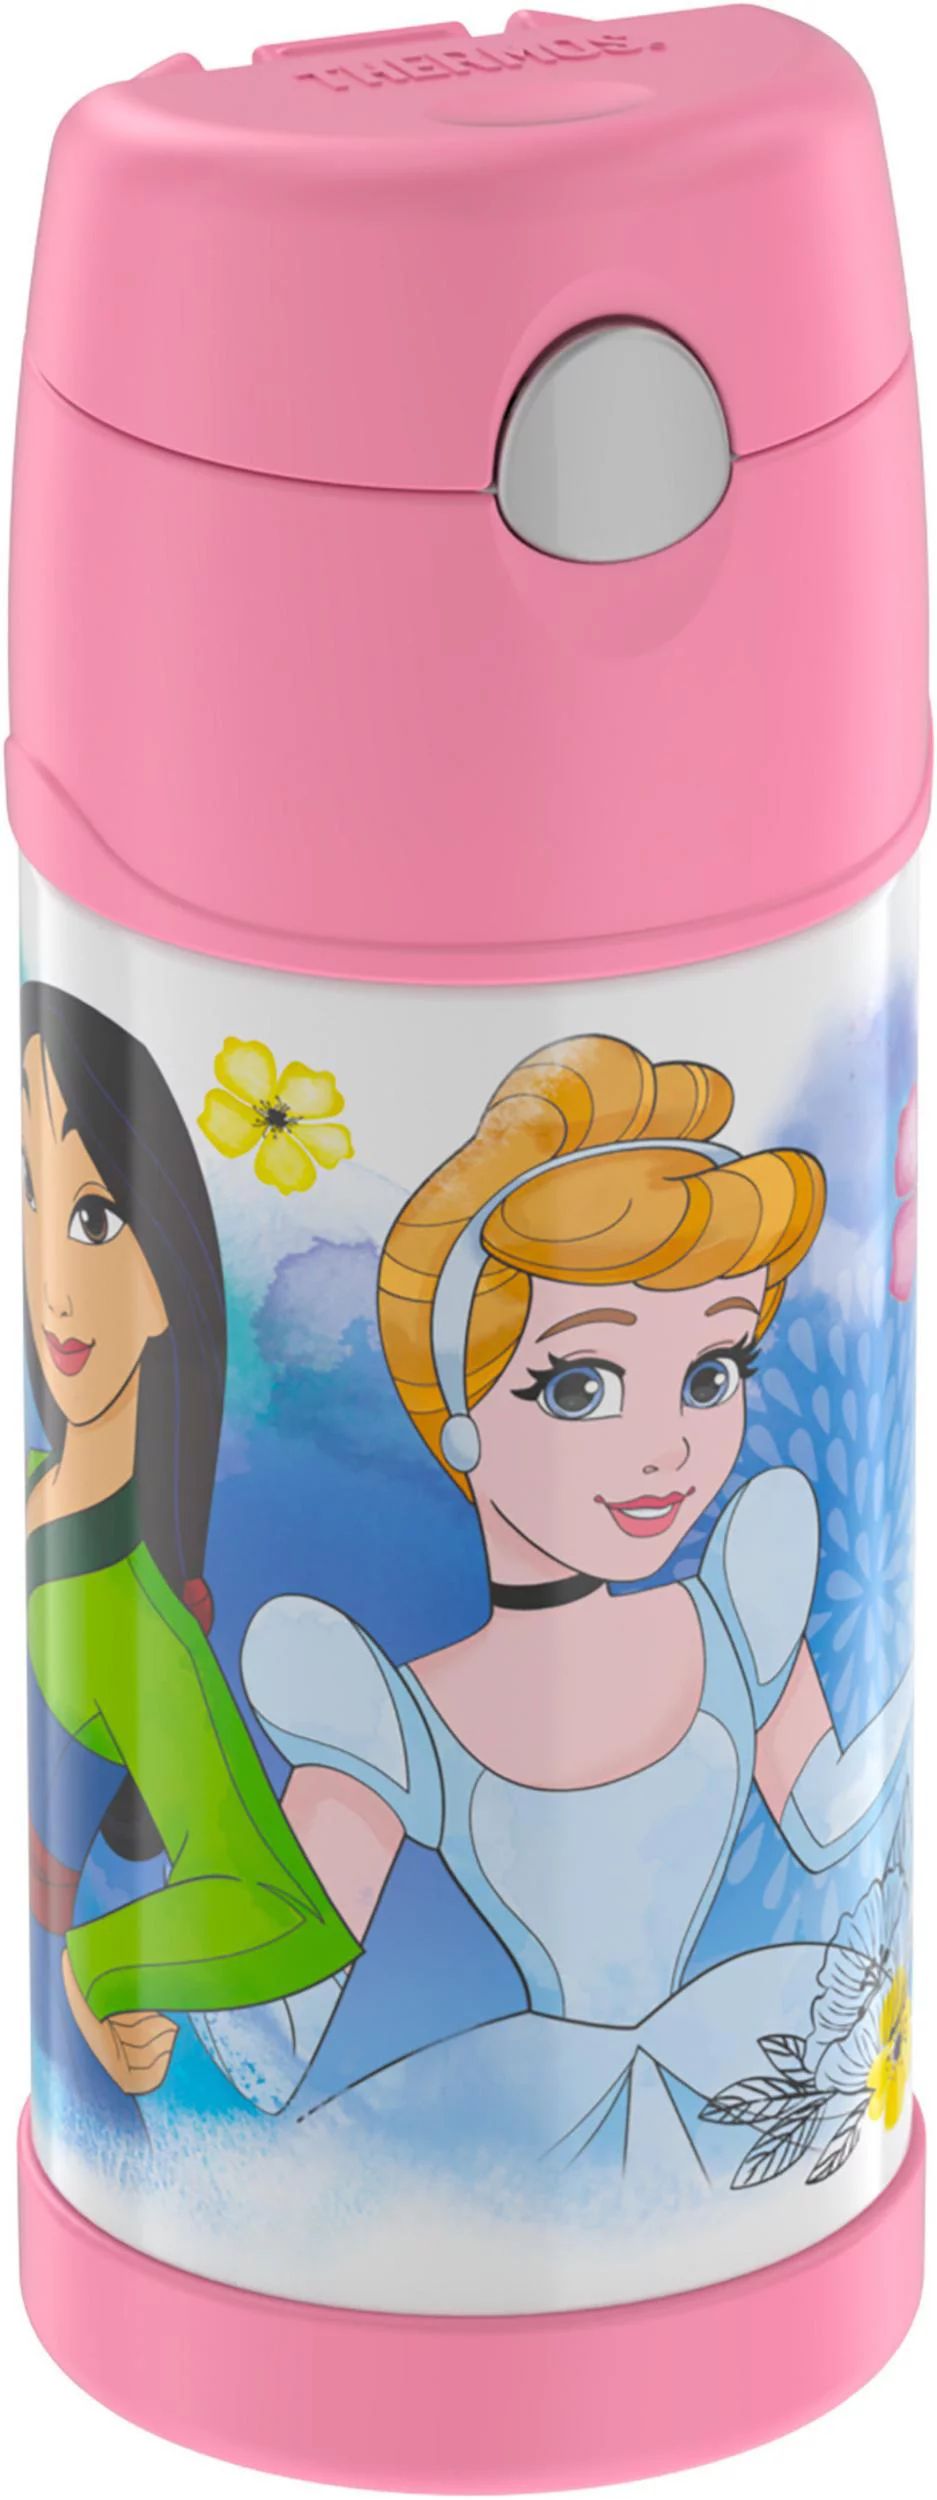 Thermos Vacuum Insulated Stainless Steel 12 Ounce Funtainer with Straw - Disney Princess | Walmart (US)